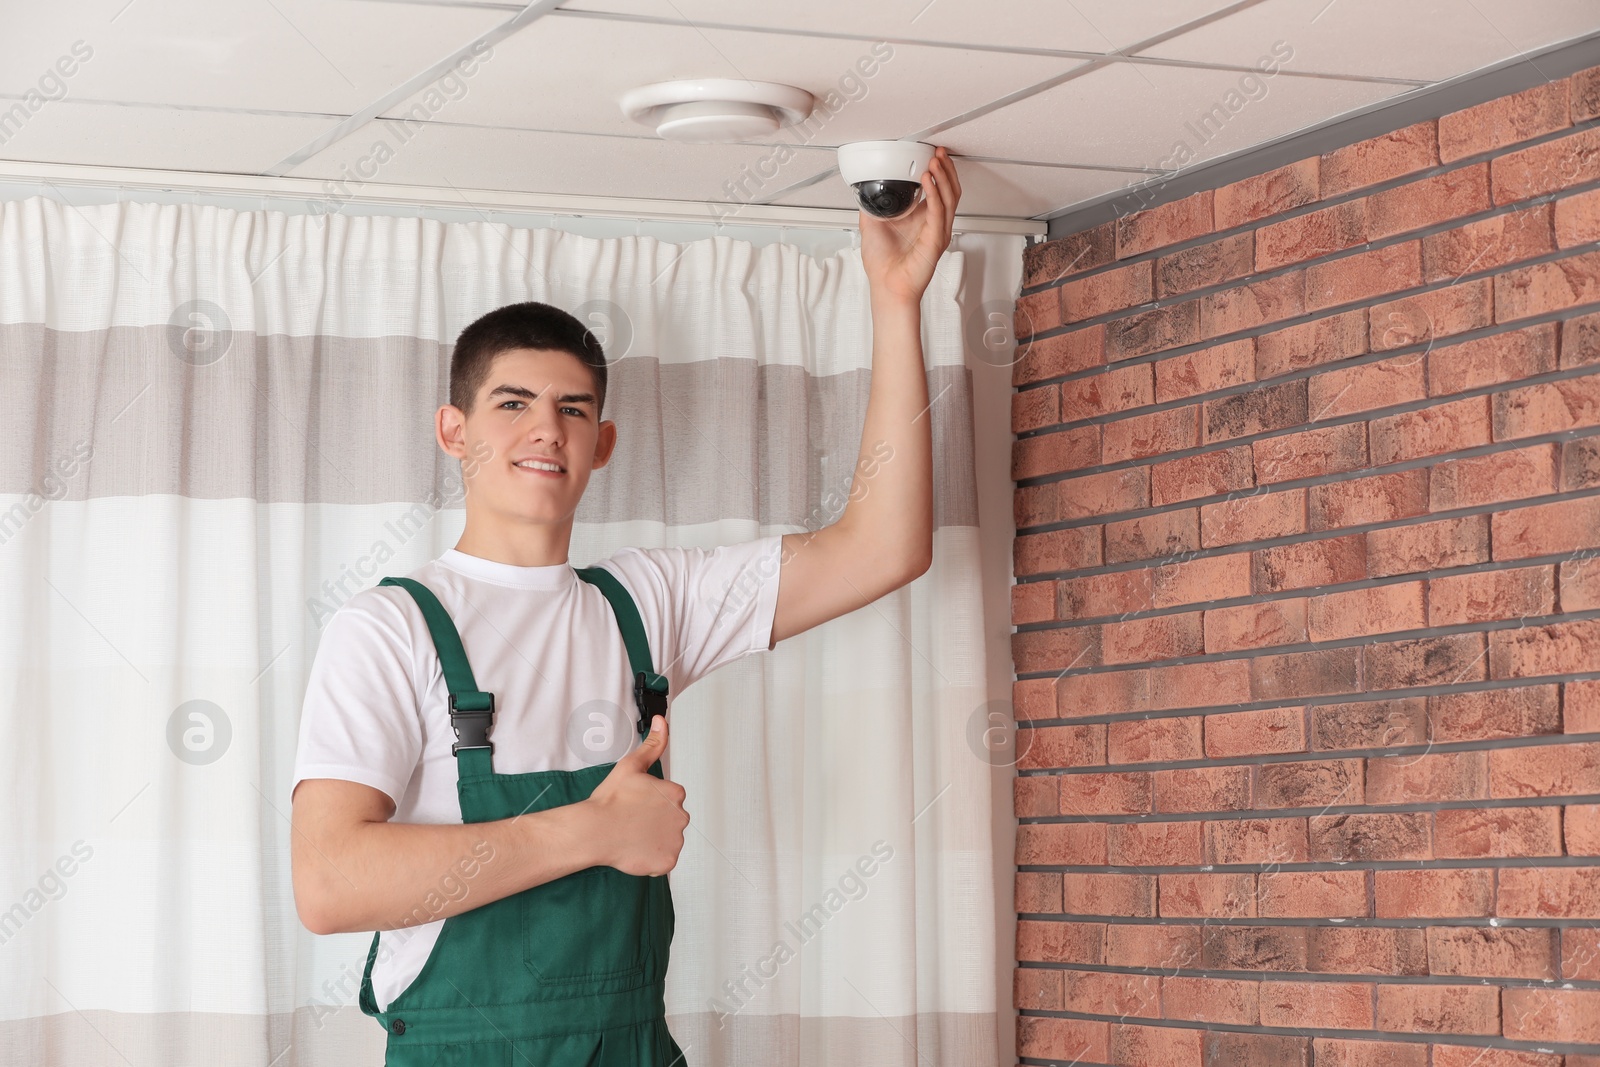 Photo of Technician showing thumbs up while installing CCTV camera on ceiling indoors